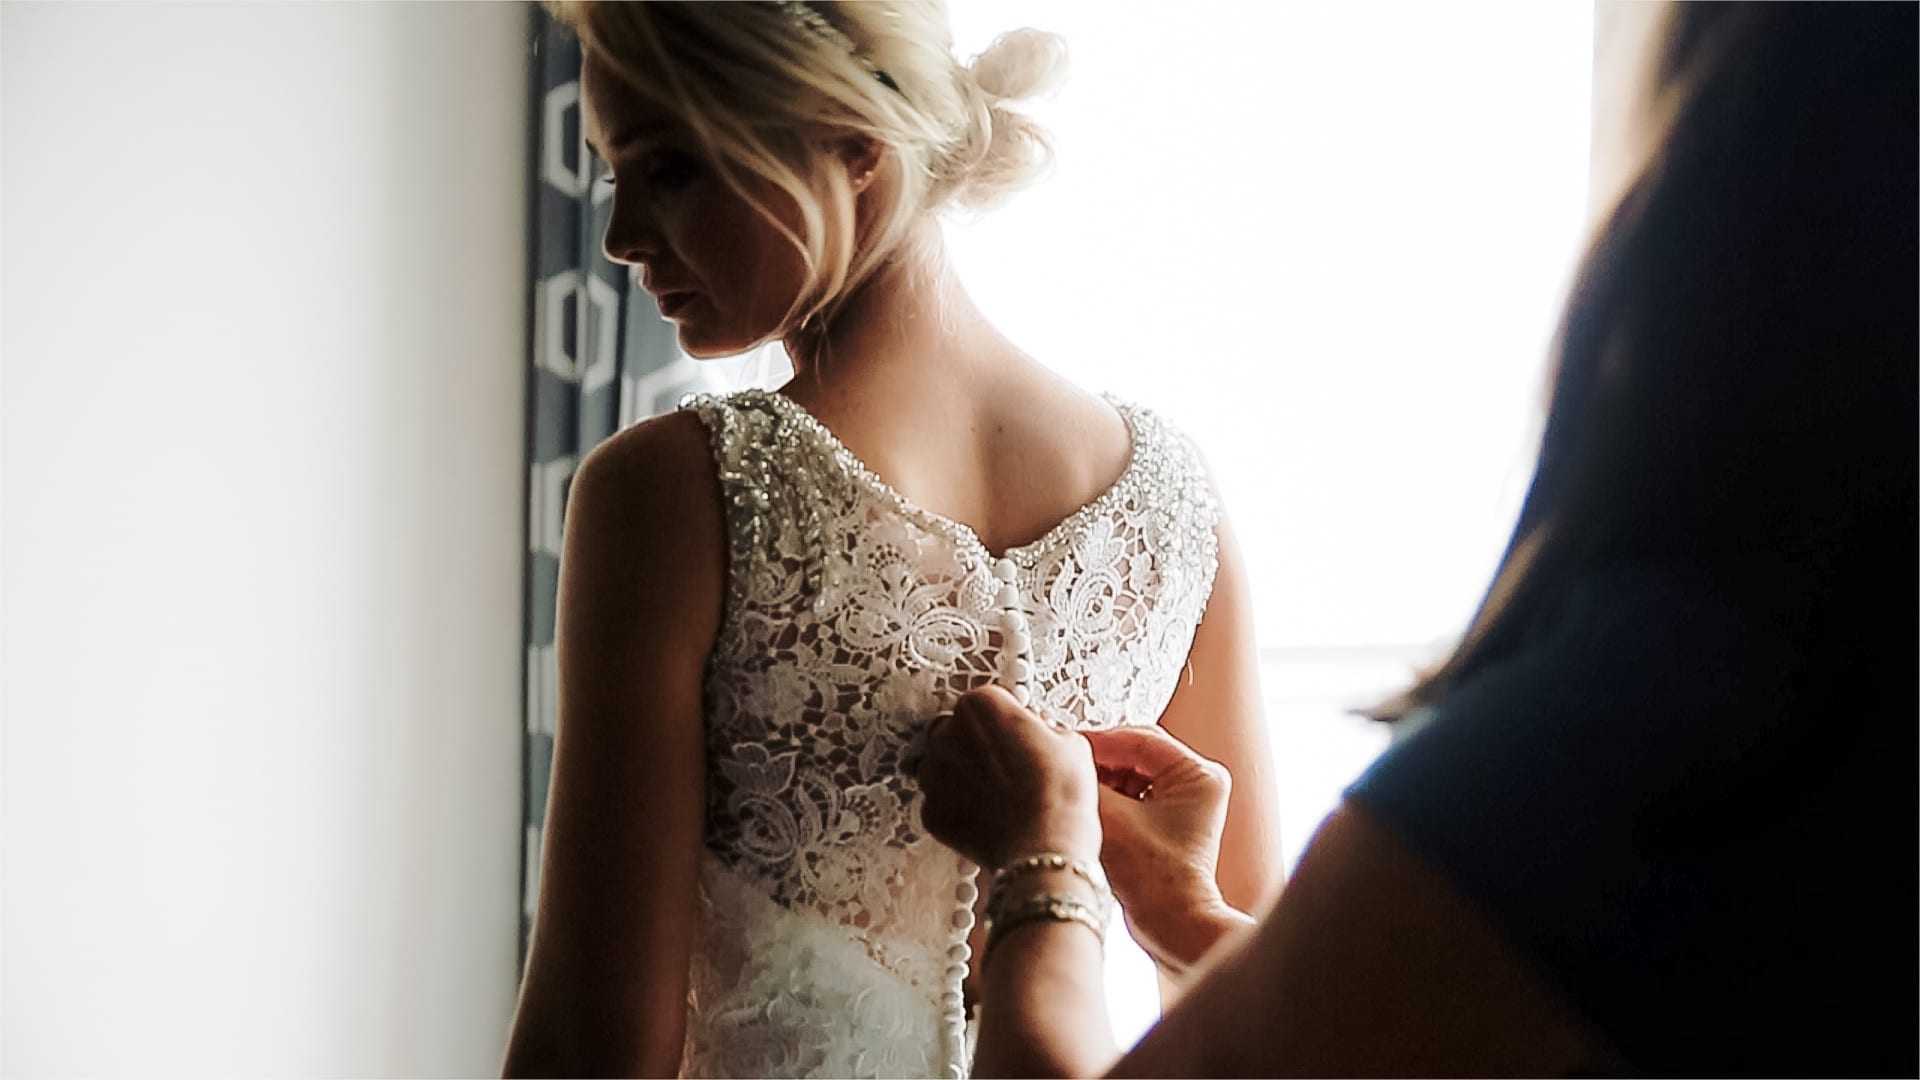 Blonde woman facing a large wedding looking over her left shoulder. Her mother is behind her finishing buttoning the back of the brides lace dress.